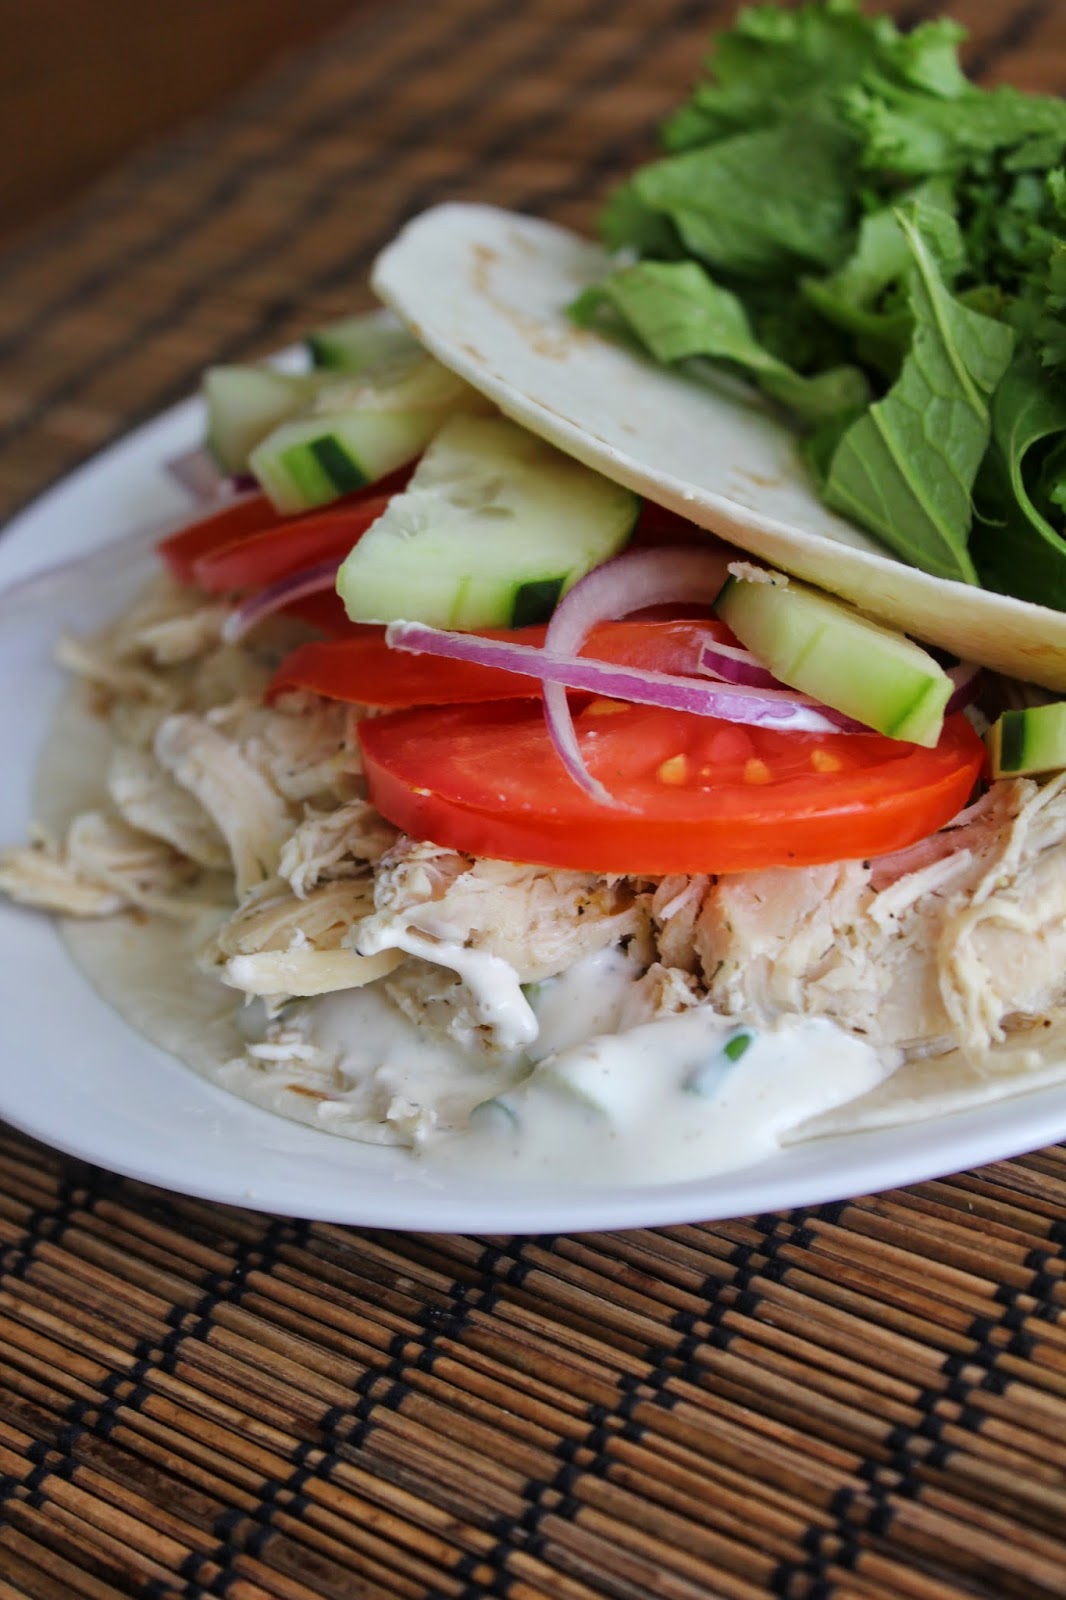 Recipe: Sandwiches, Recipe: Chicken, Recipe: Healthy, Lemon Chicken Wraps with Tzyaki Sauce, Deals to Meals, Easy Meal Ideas, 